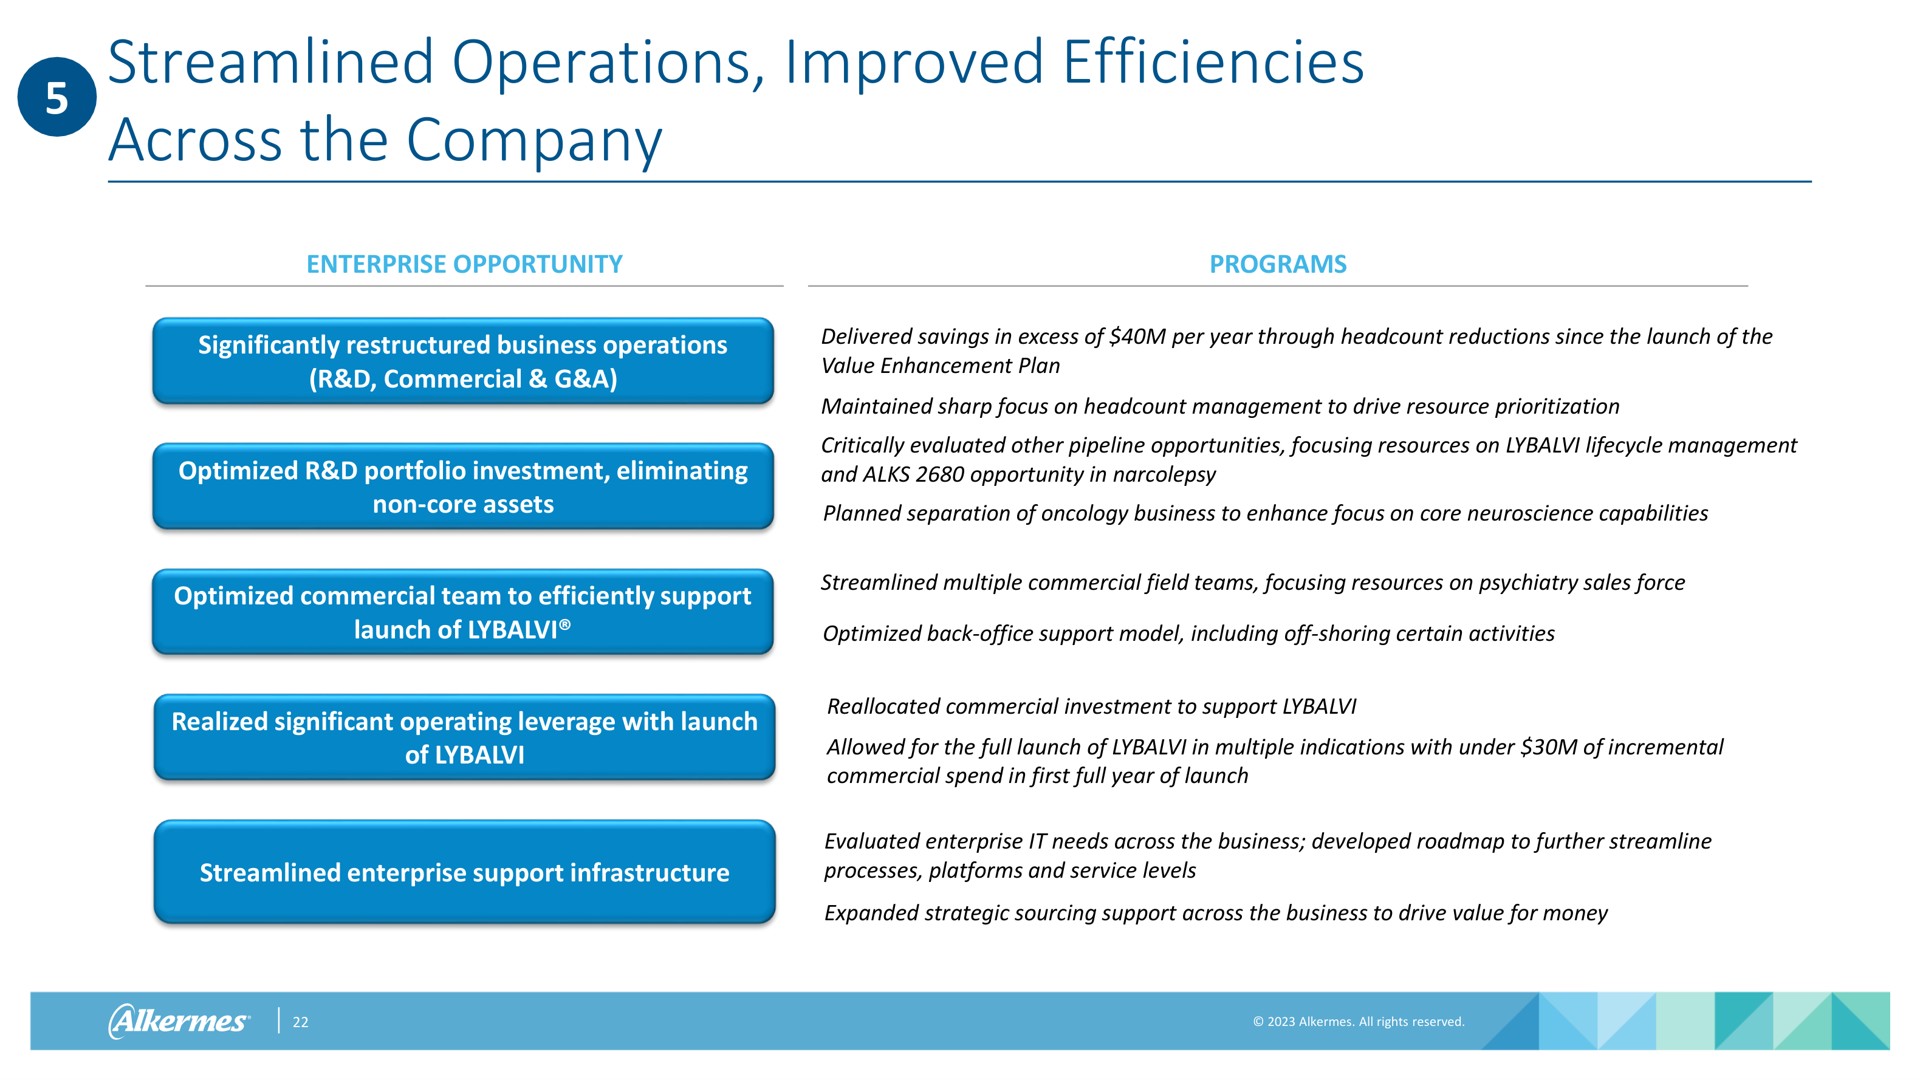 streamlined operations improved efficiencies across the company | Alkermes